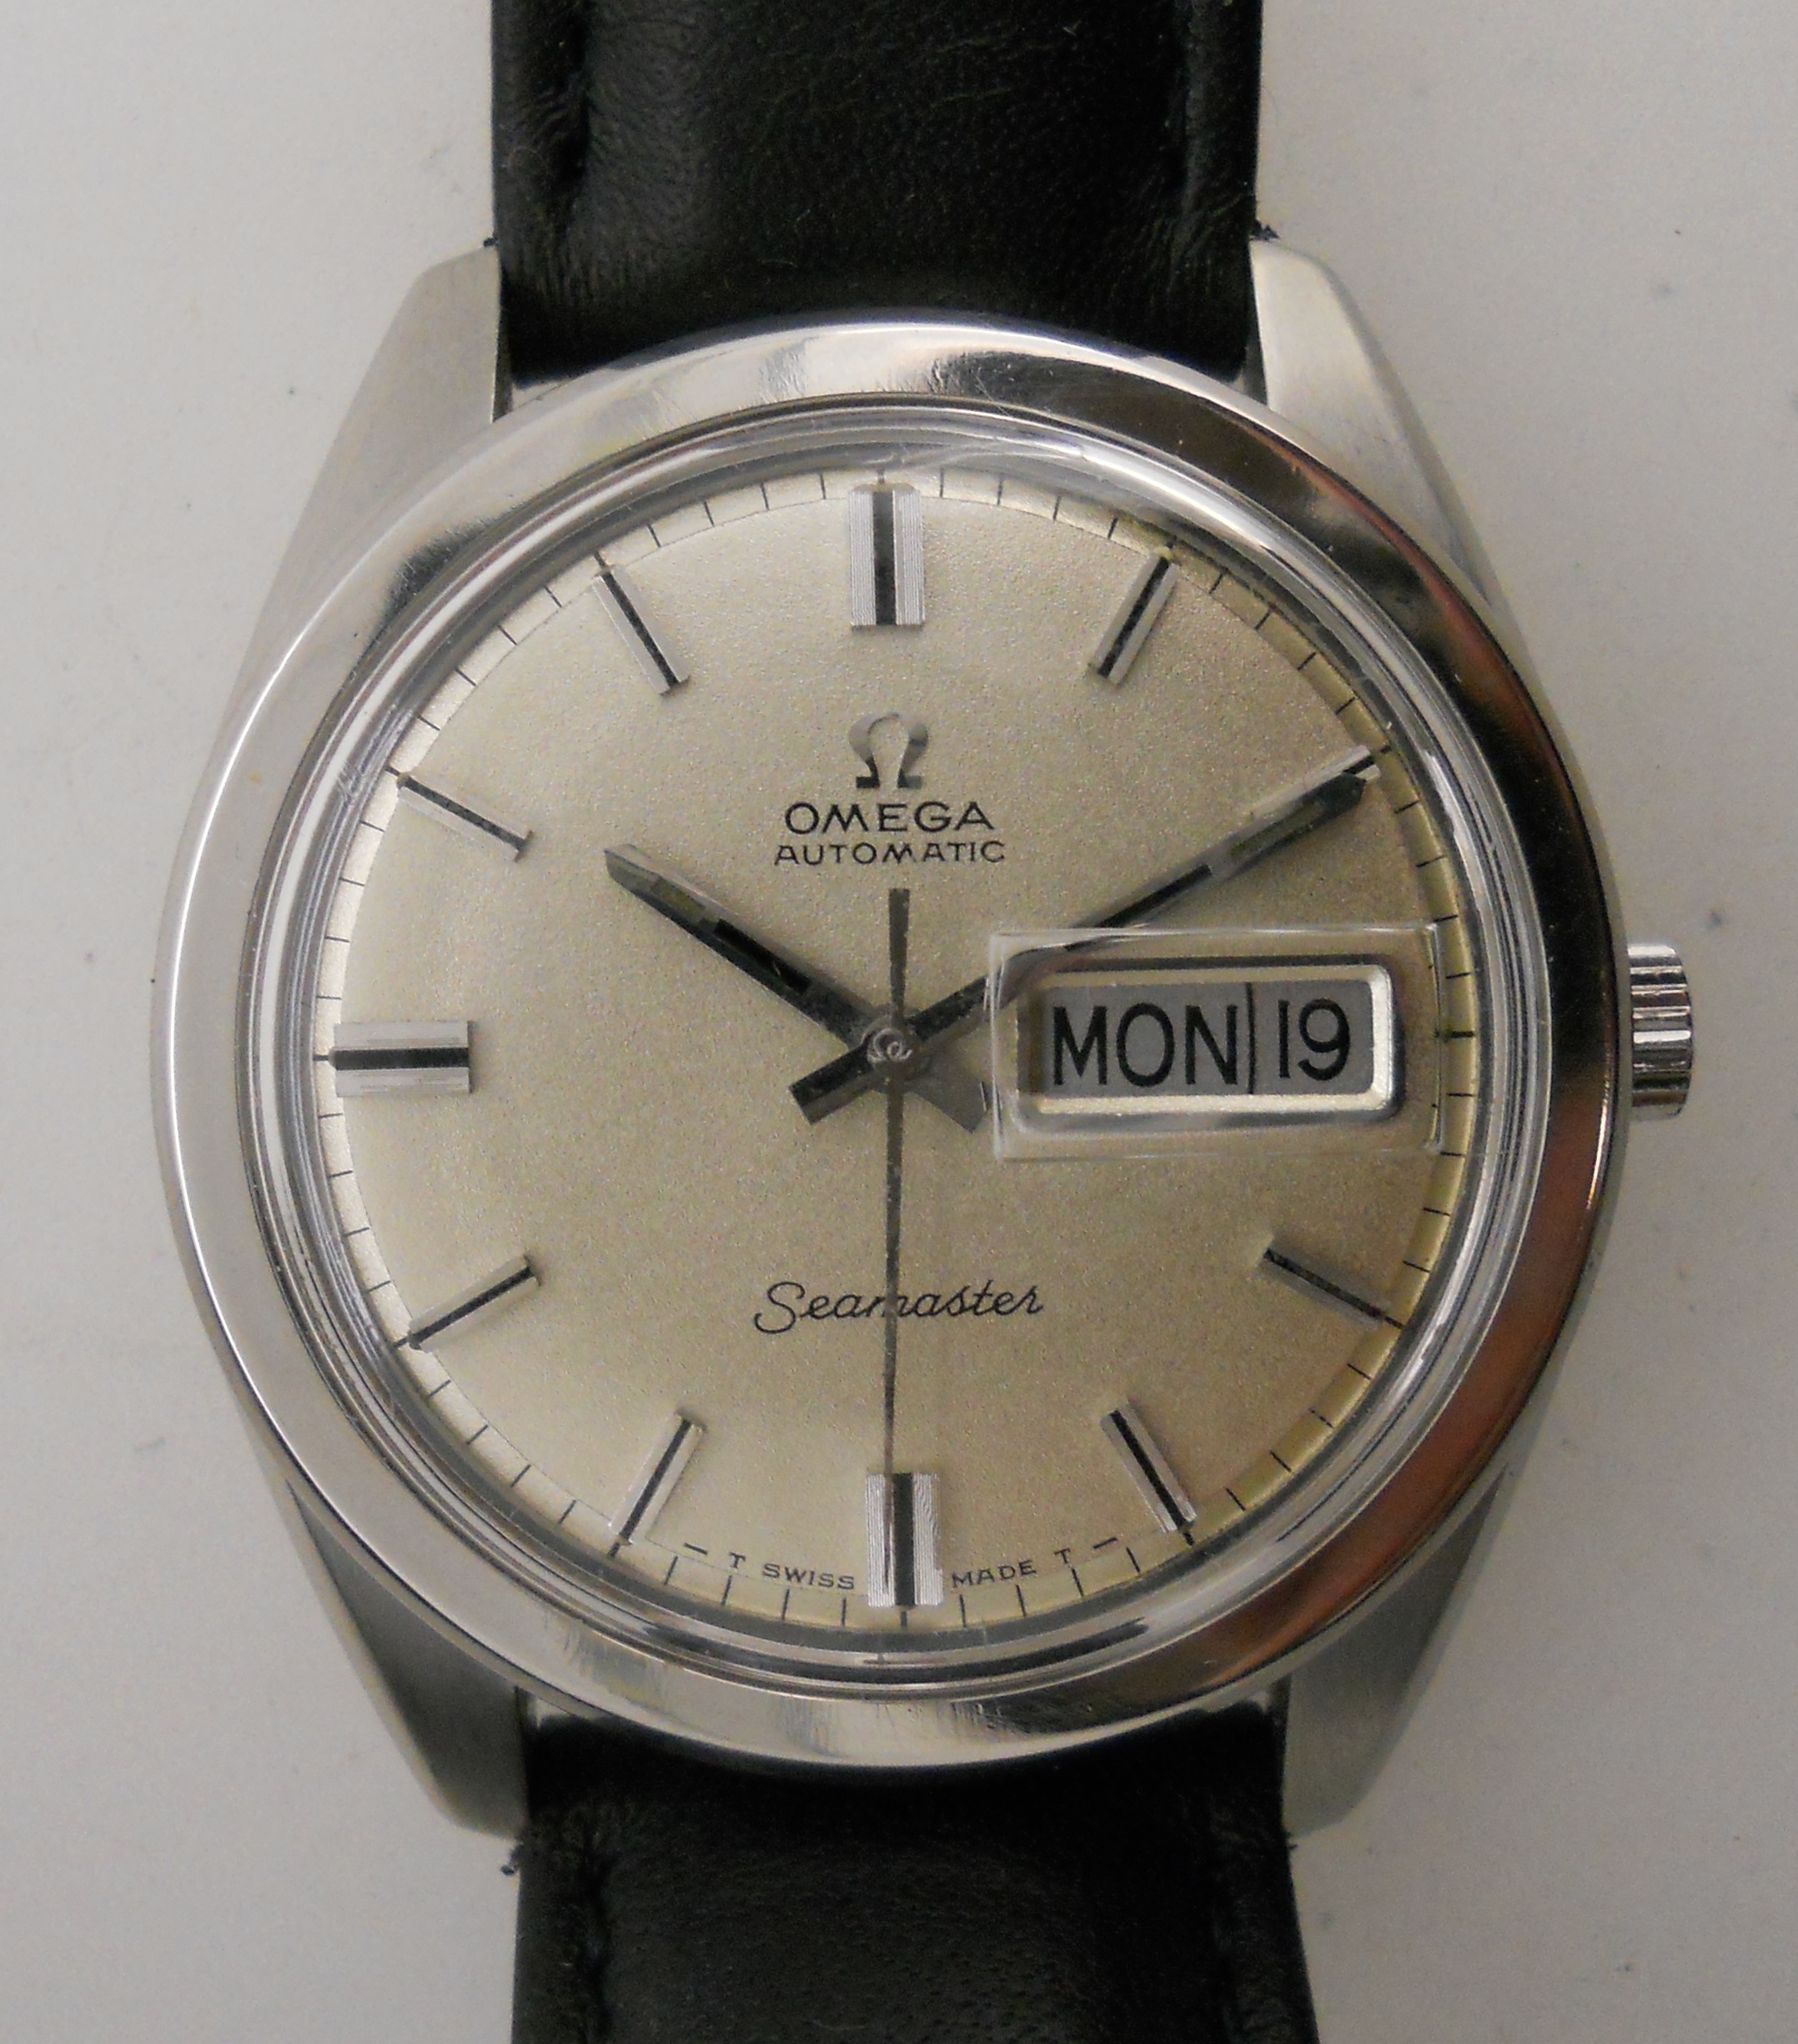 Omega Seamaster 1968 | robswatches